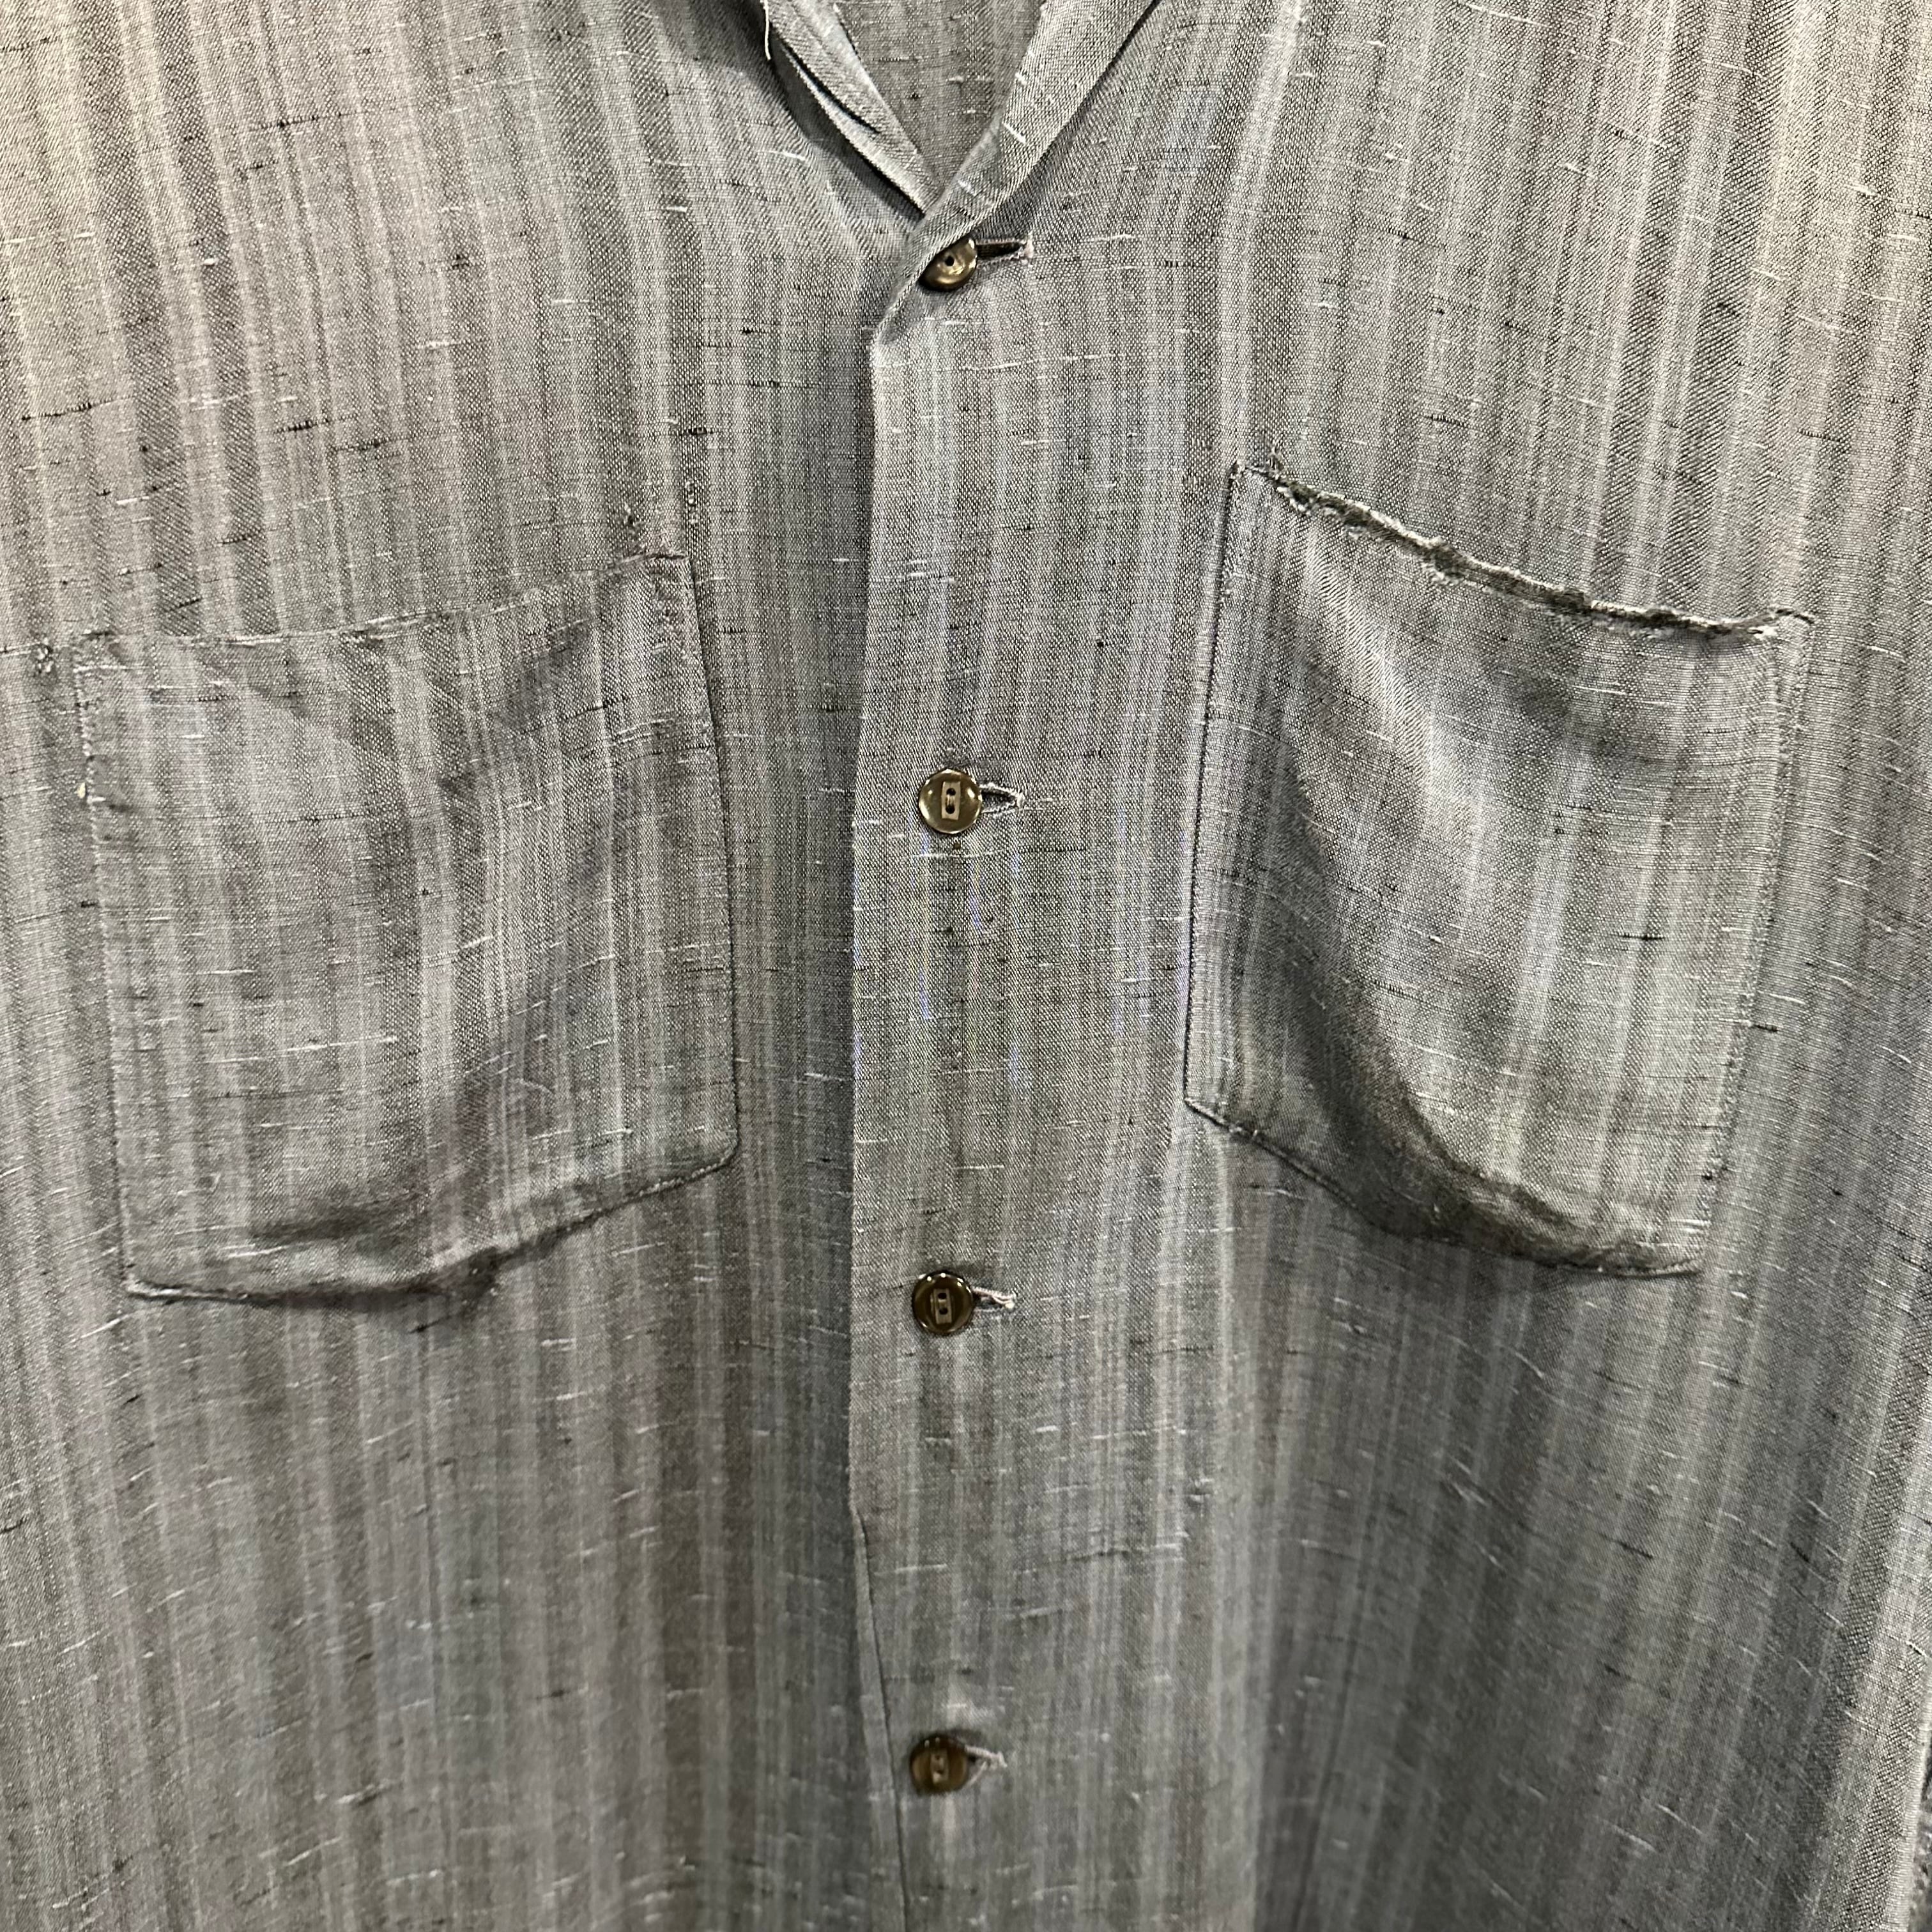 1960's Over Sized Open Collar RayonShirt